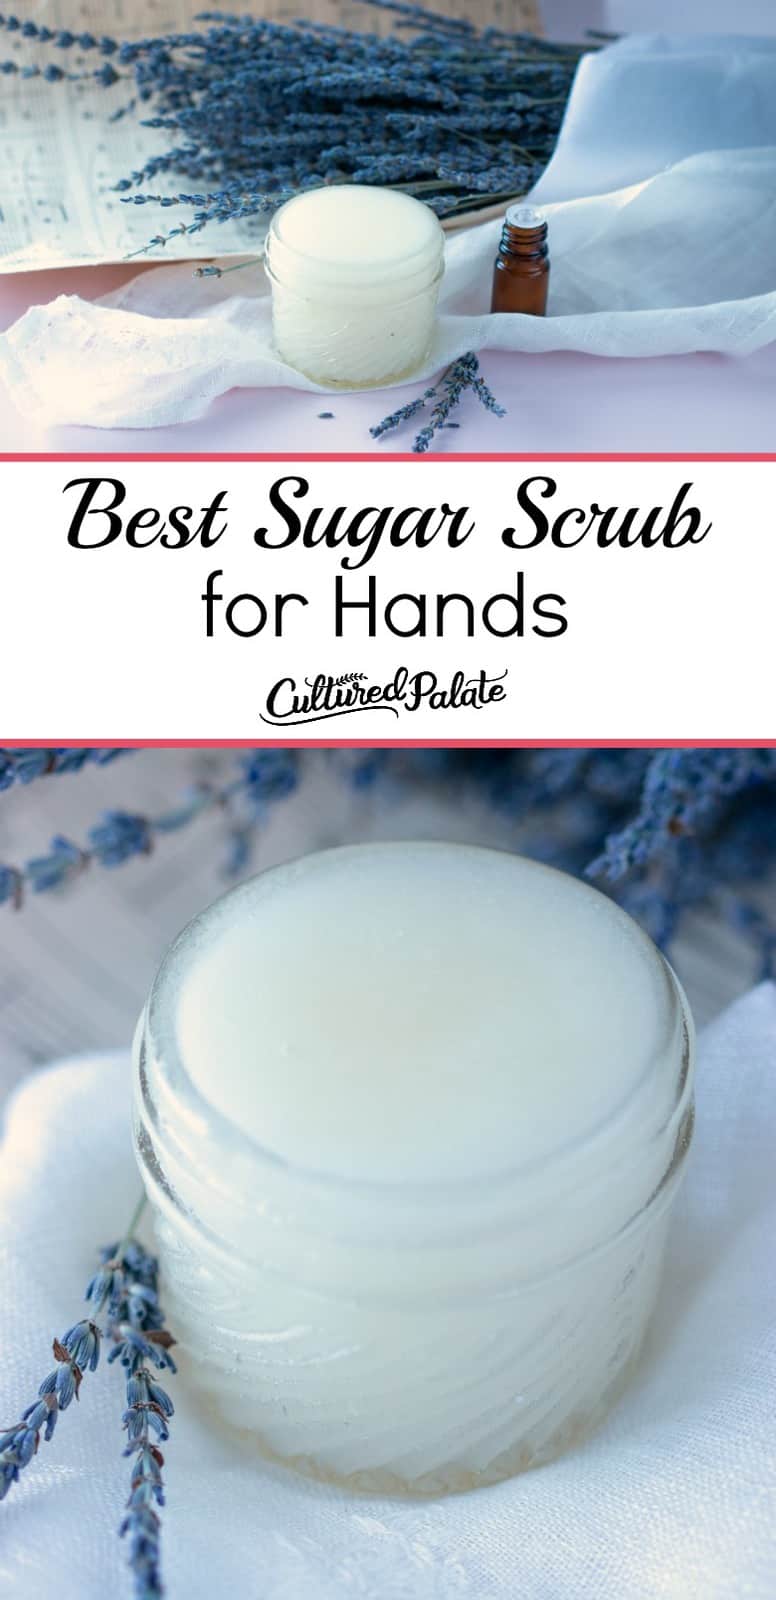 Best Sugar Scrub for Hands shown in two images in glass jars with text overlay